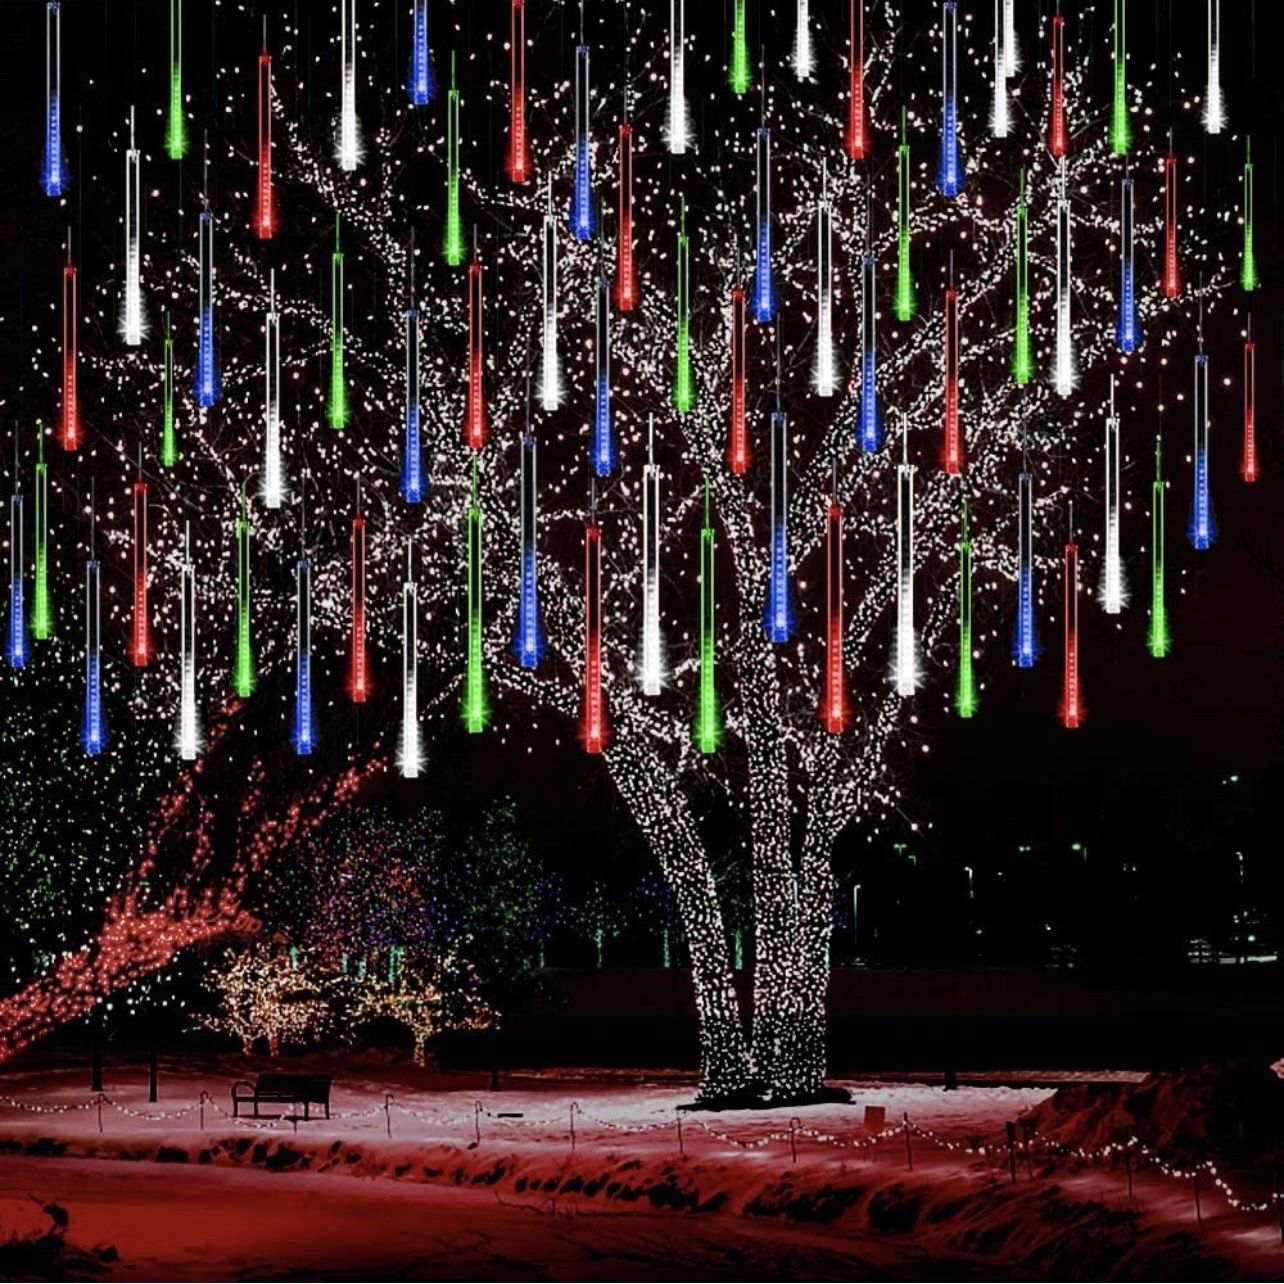 Kwaiffeo Meteor Shower Lights Falling Rain Lights, Christmas Lights Outdoor 12 inch 8 Tube Snow Falling Icicle Cascading Lights for Xmas Tree Decor We